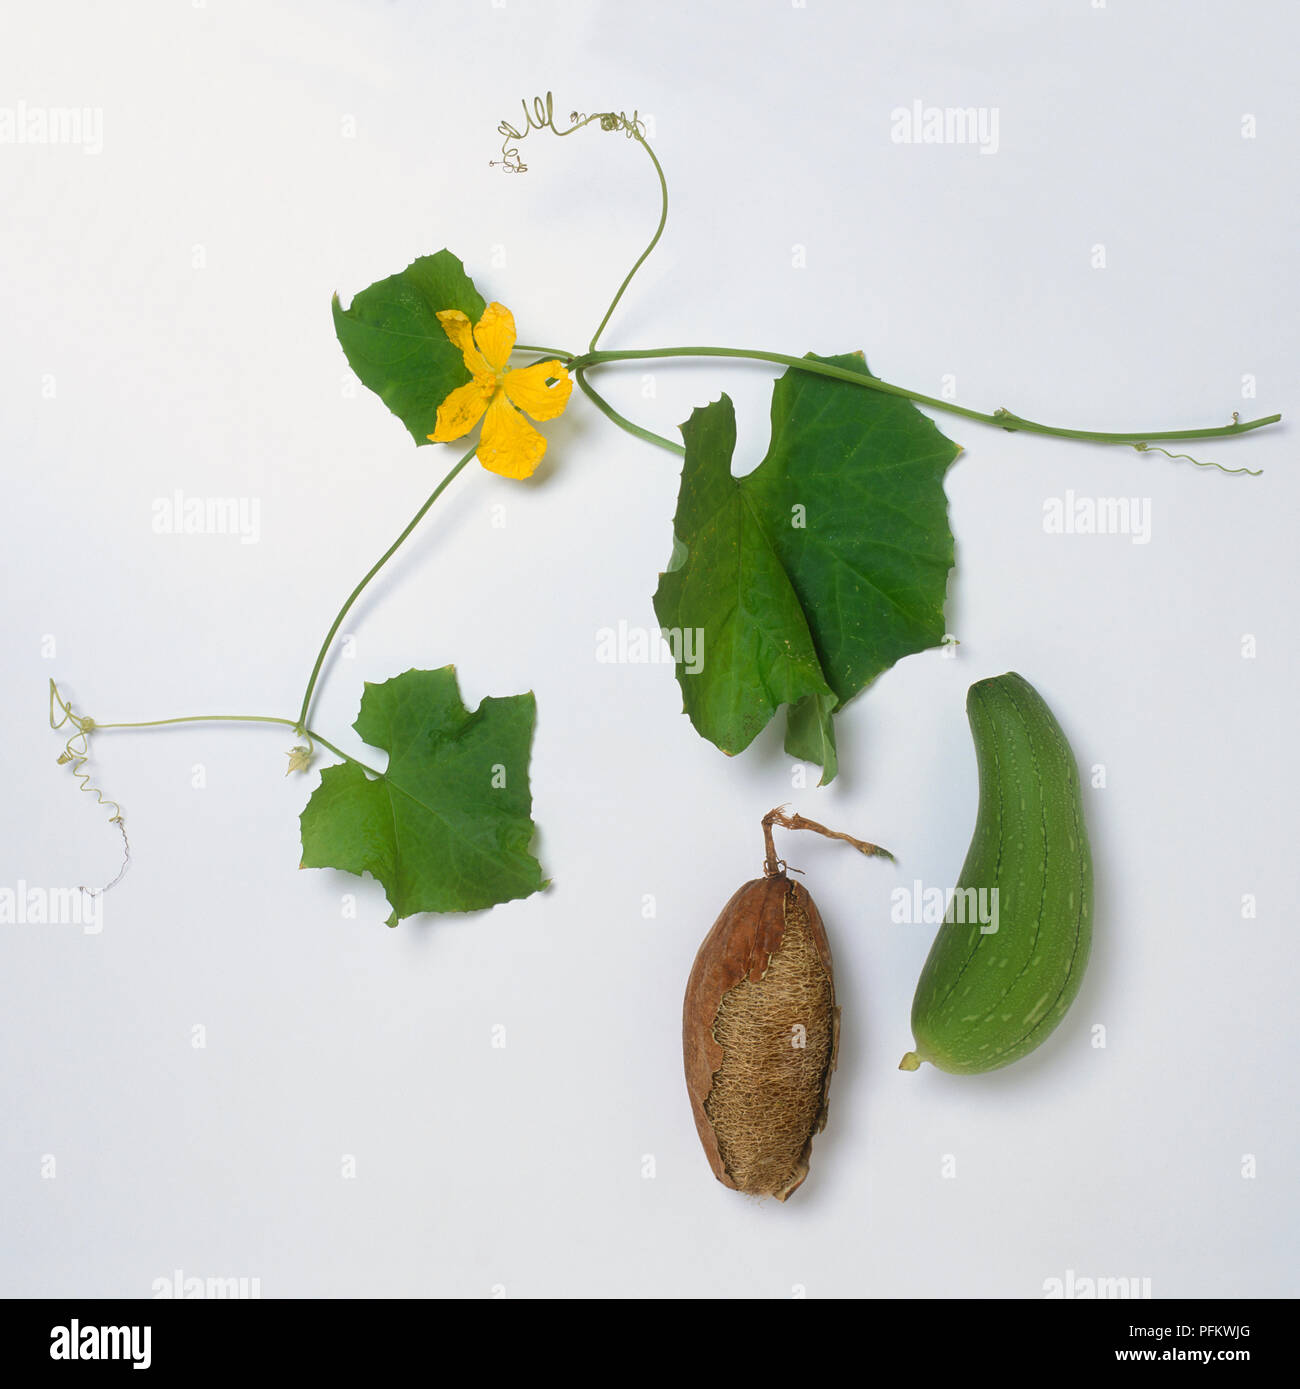 Flower, fruit, leaf and tendril from Luffa cylindrica (Smooth loofah) Stock Photo